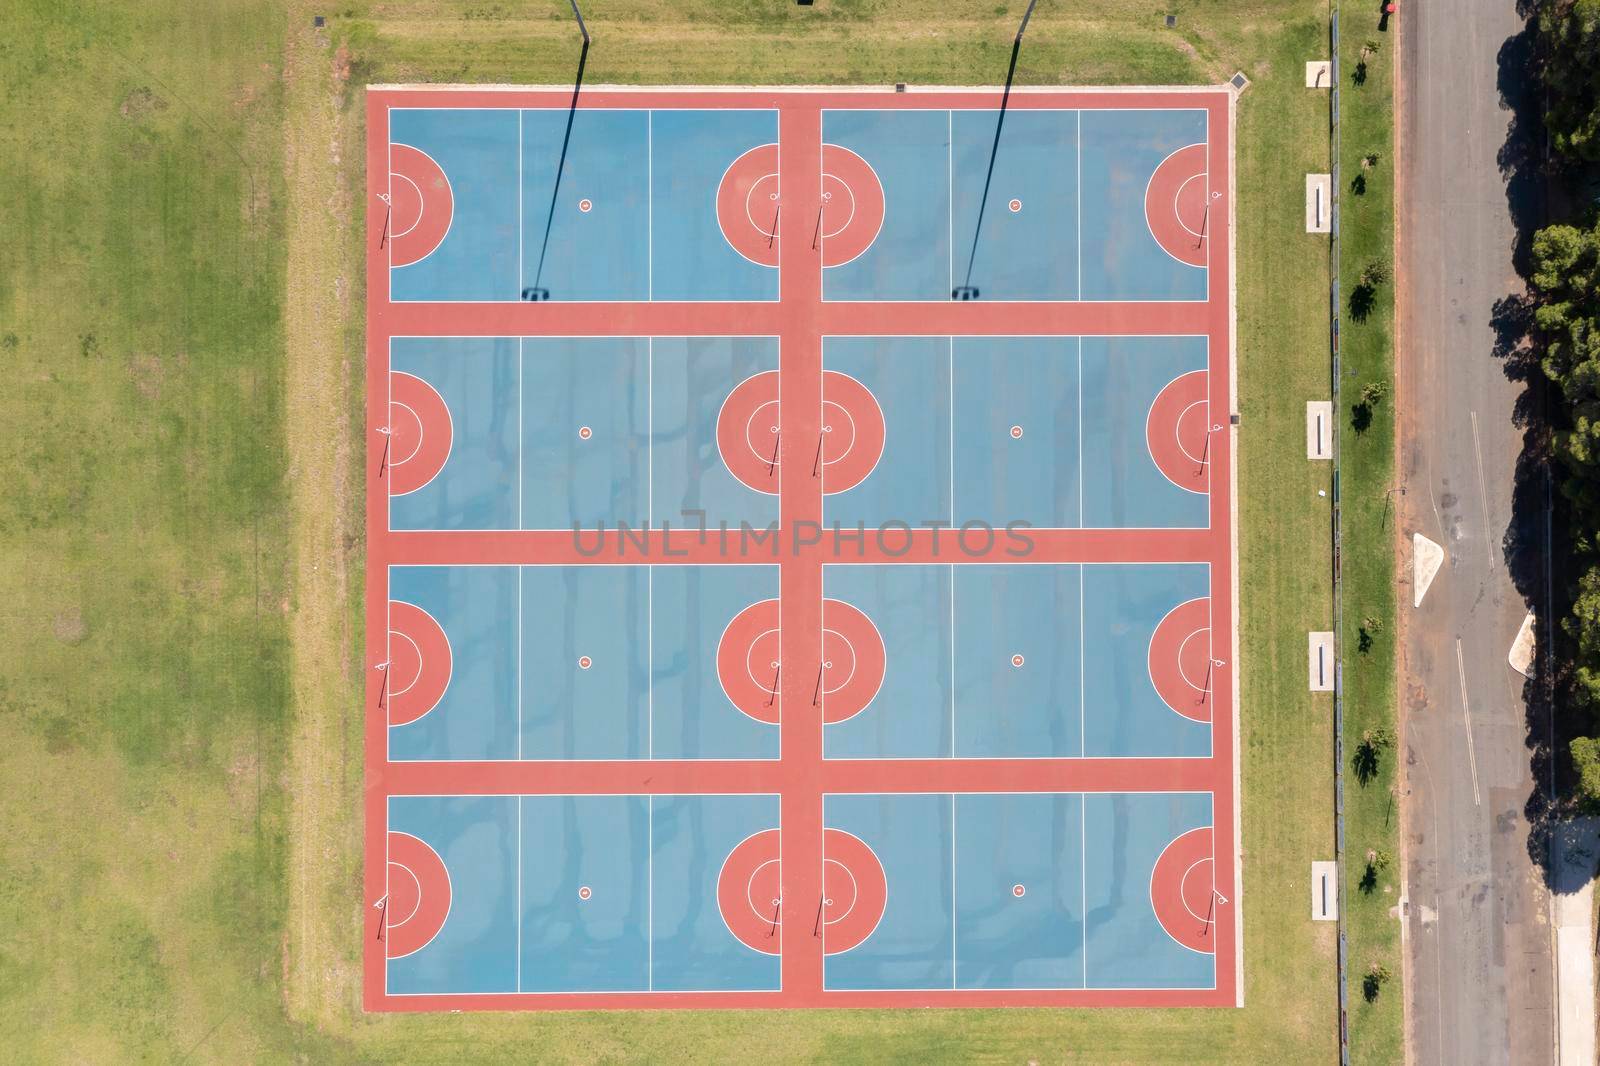 Drone aerial photograph of colourful netball courts by WittkePhotos